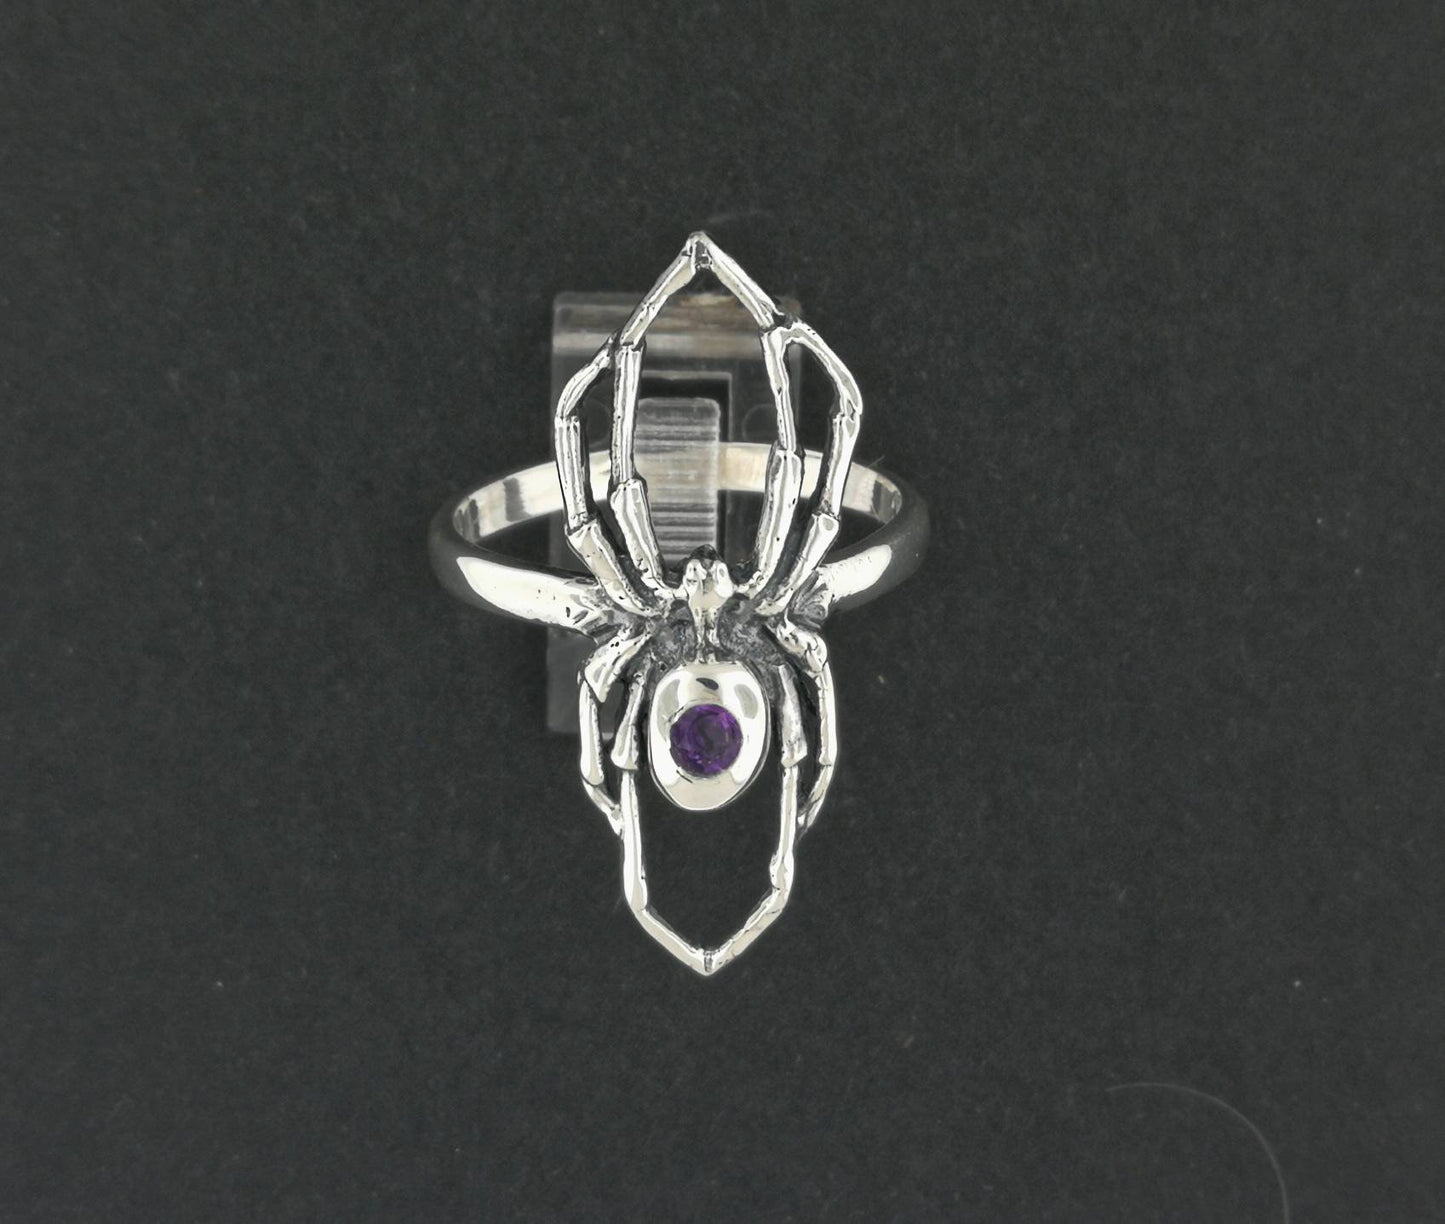 Spider ring with Gemstone in Sterling Silver